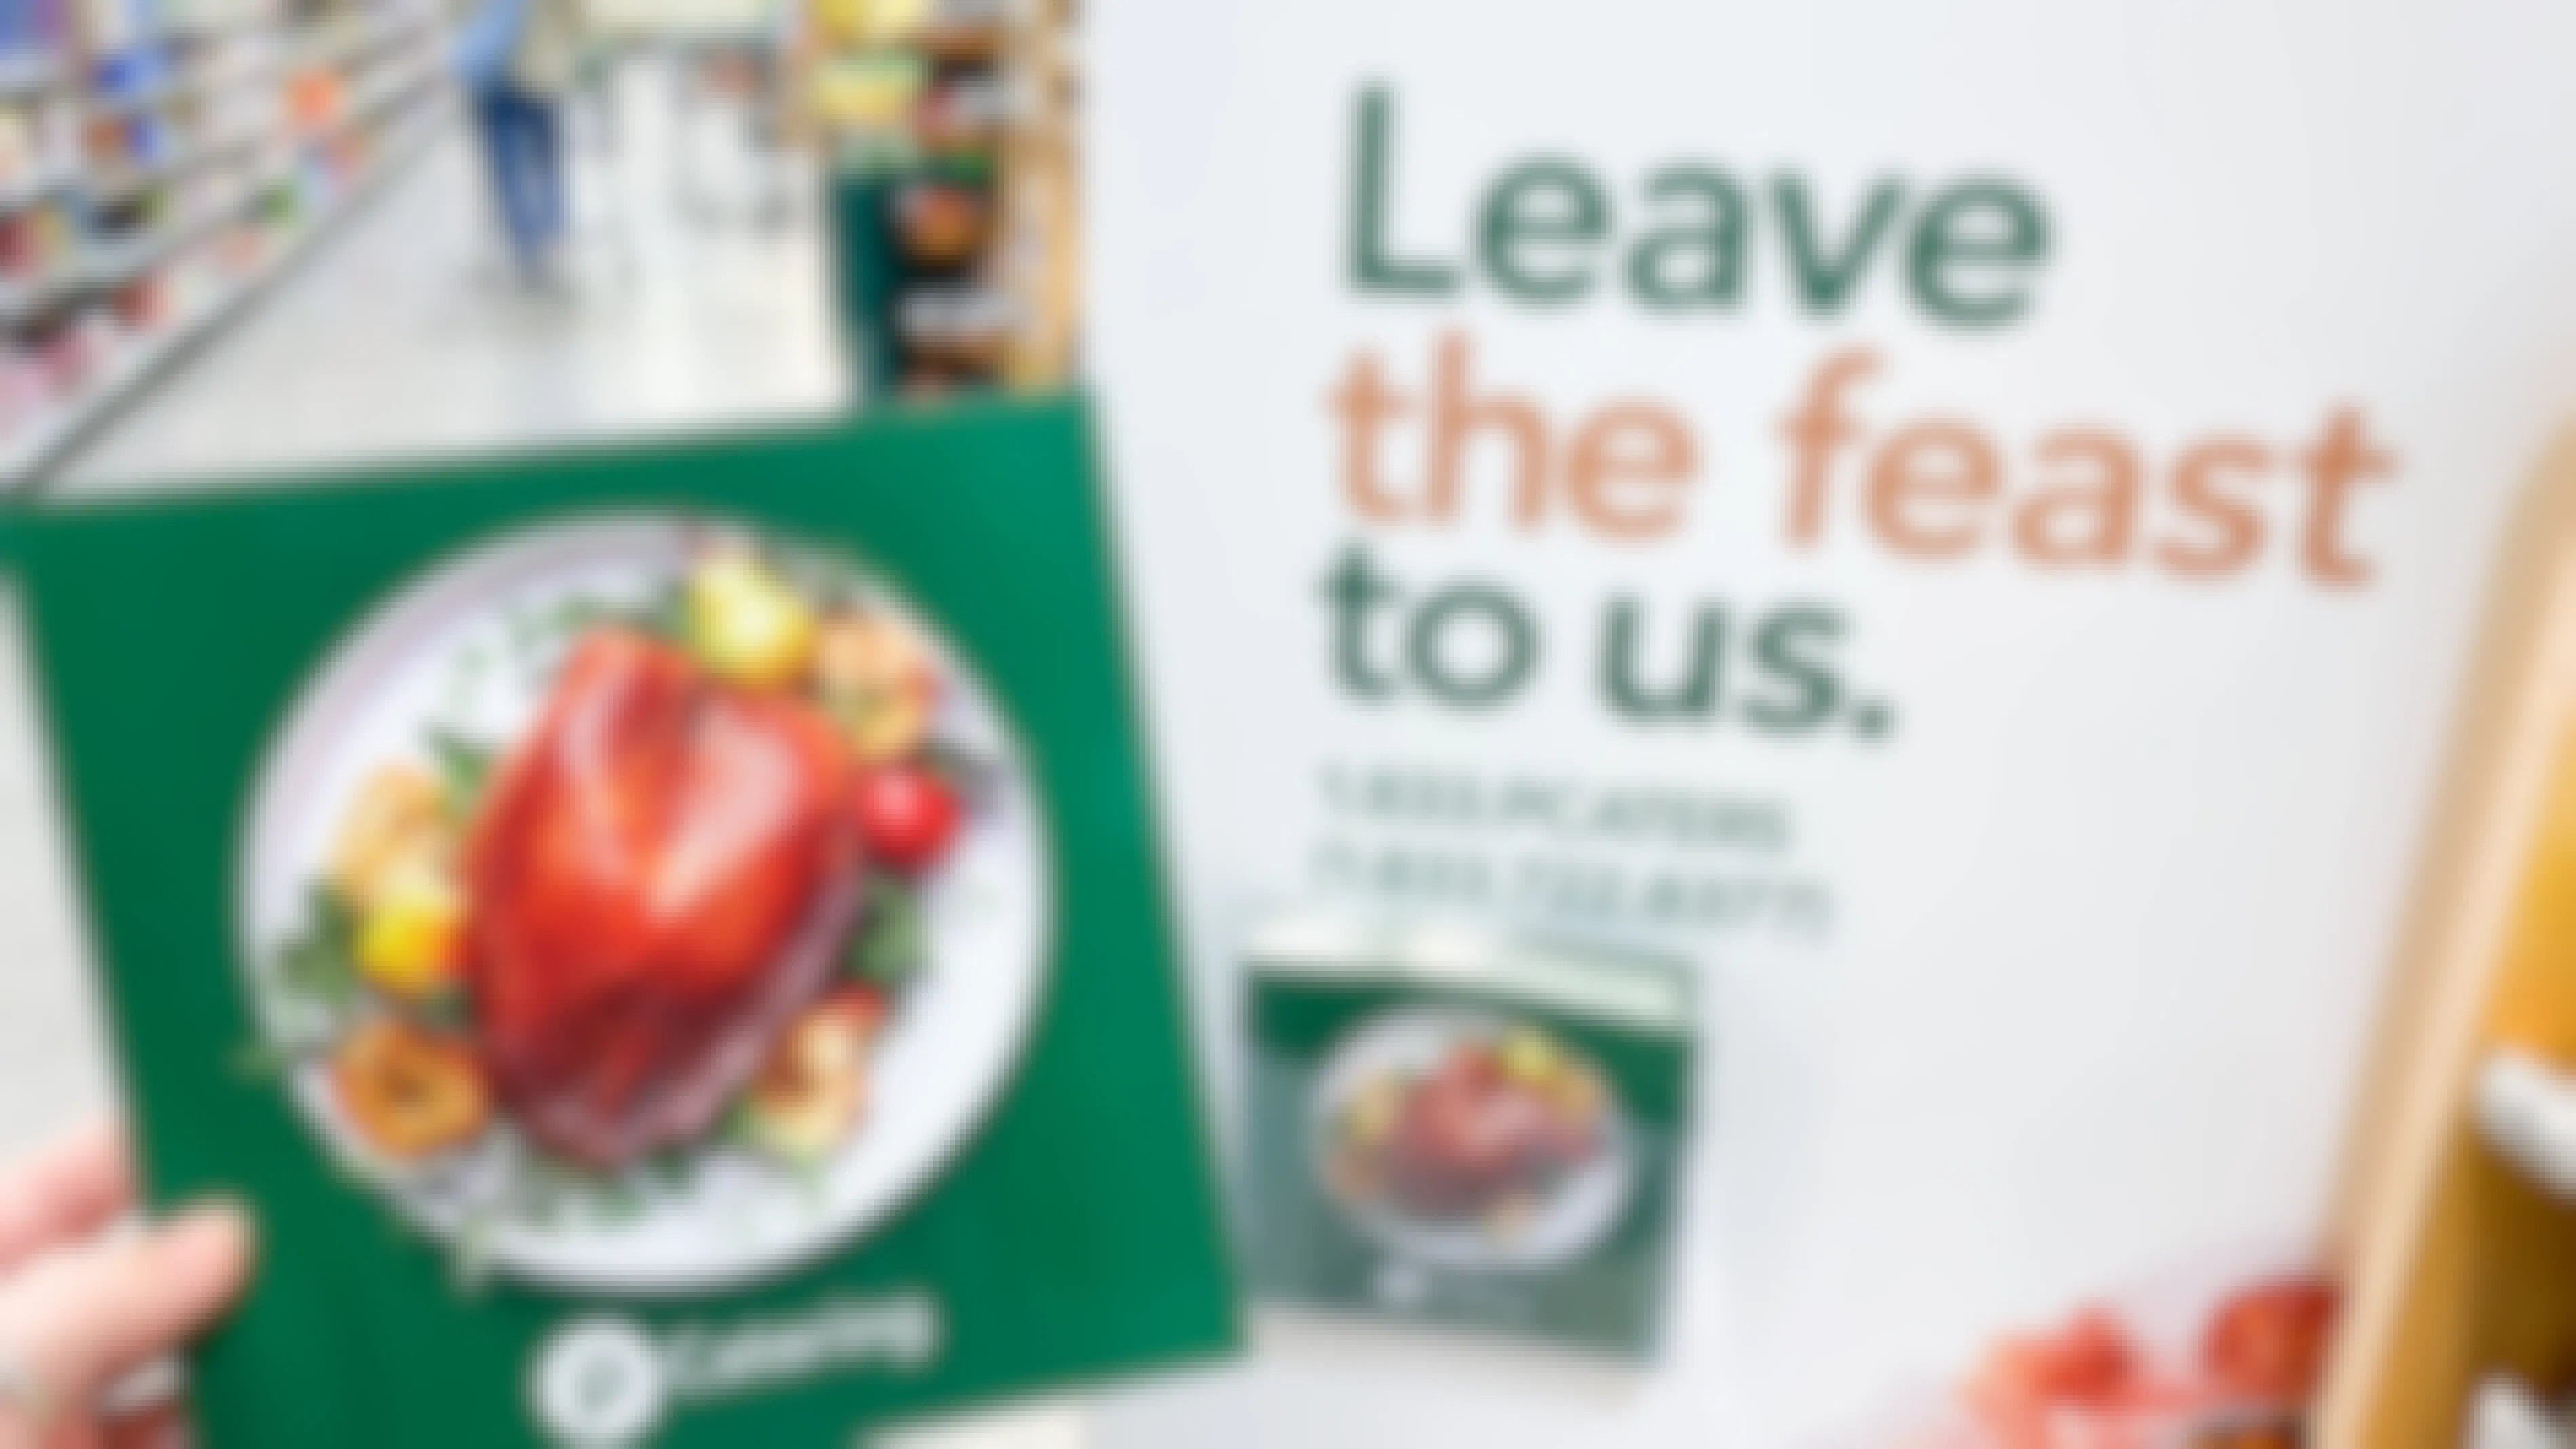 A person's hand holding up a Thanksgiving booklet next to a sign in Publix that says "Leave the Feast to us